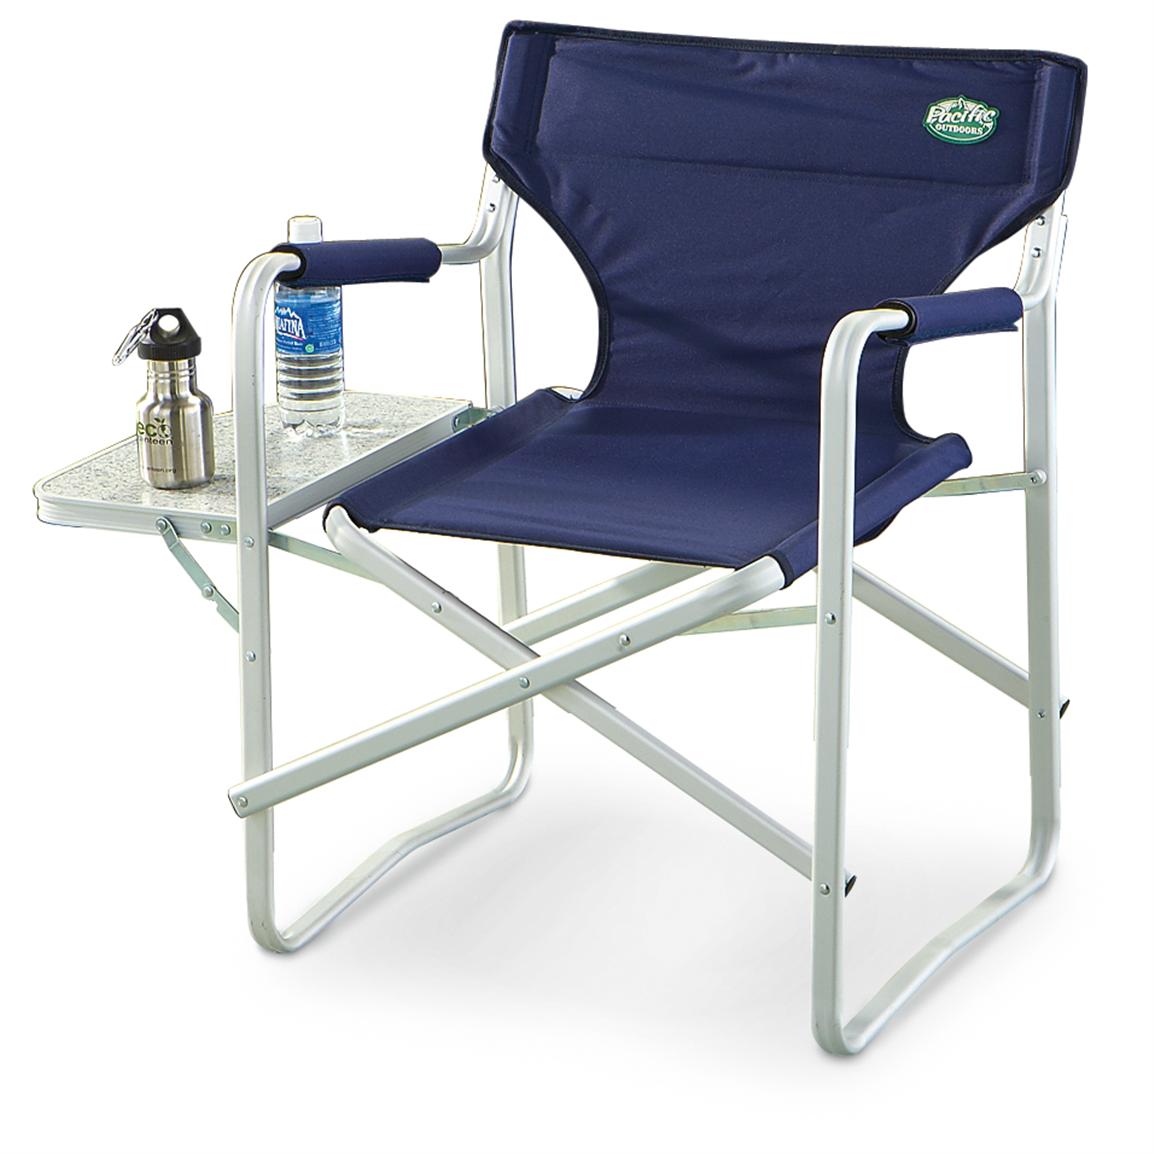 Deluxe Aluminum Camp Chair - 184878, Chairs at Sportsman's Guide